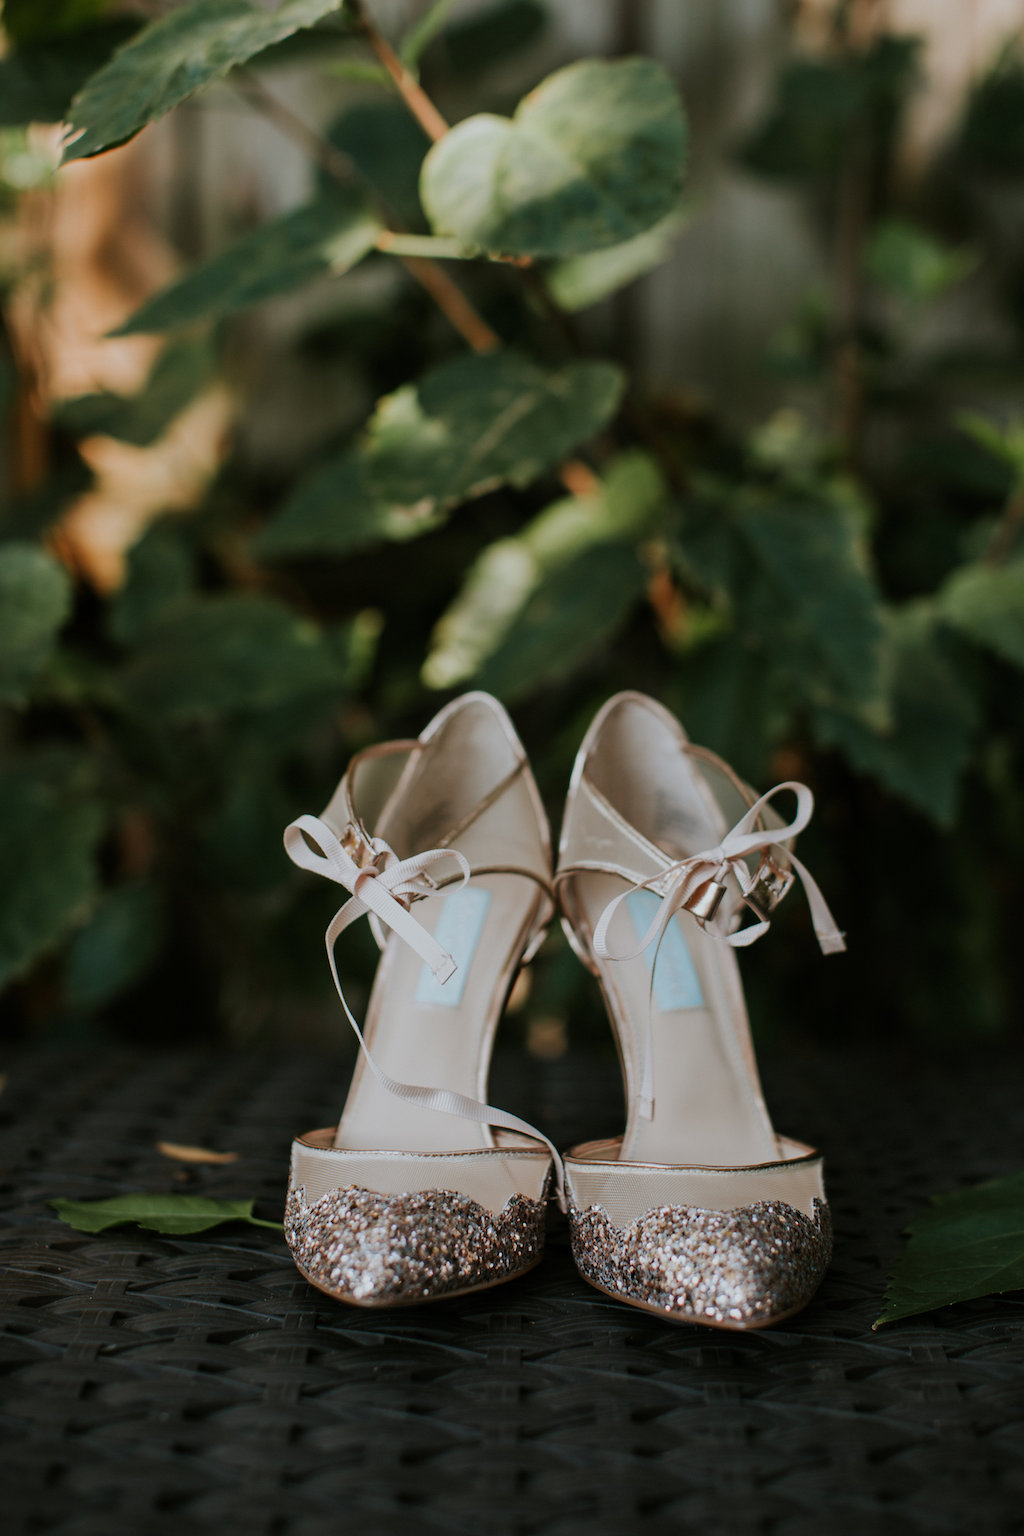 Glitter Gold Pointed Toe High Heel Wedding Shoes